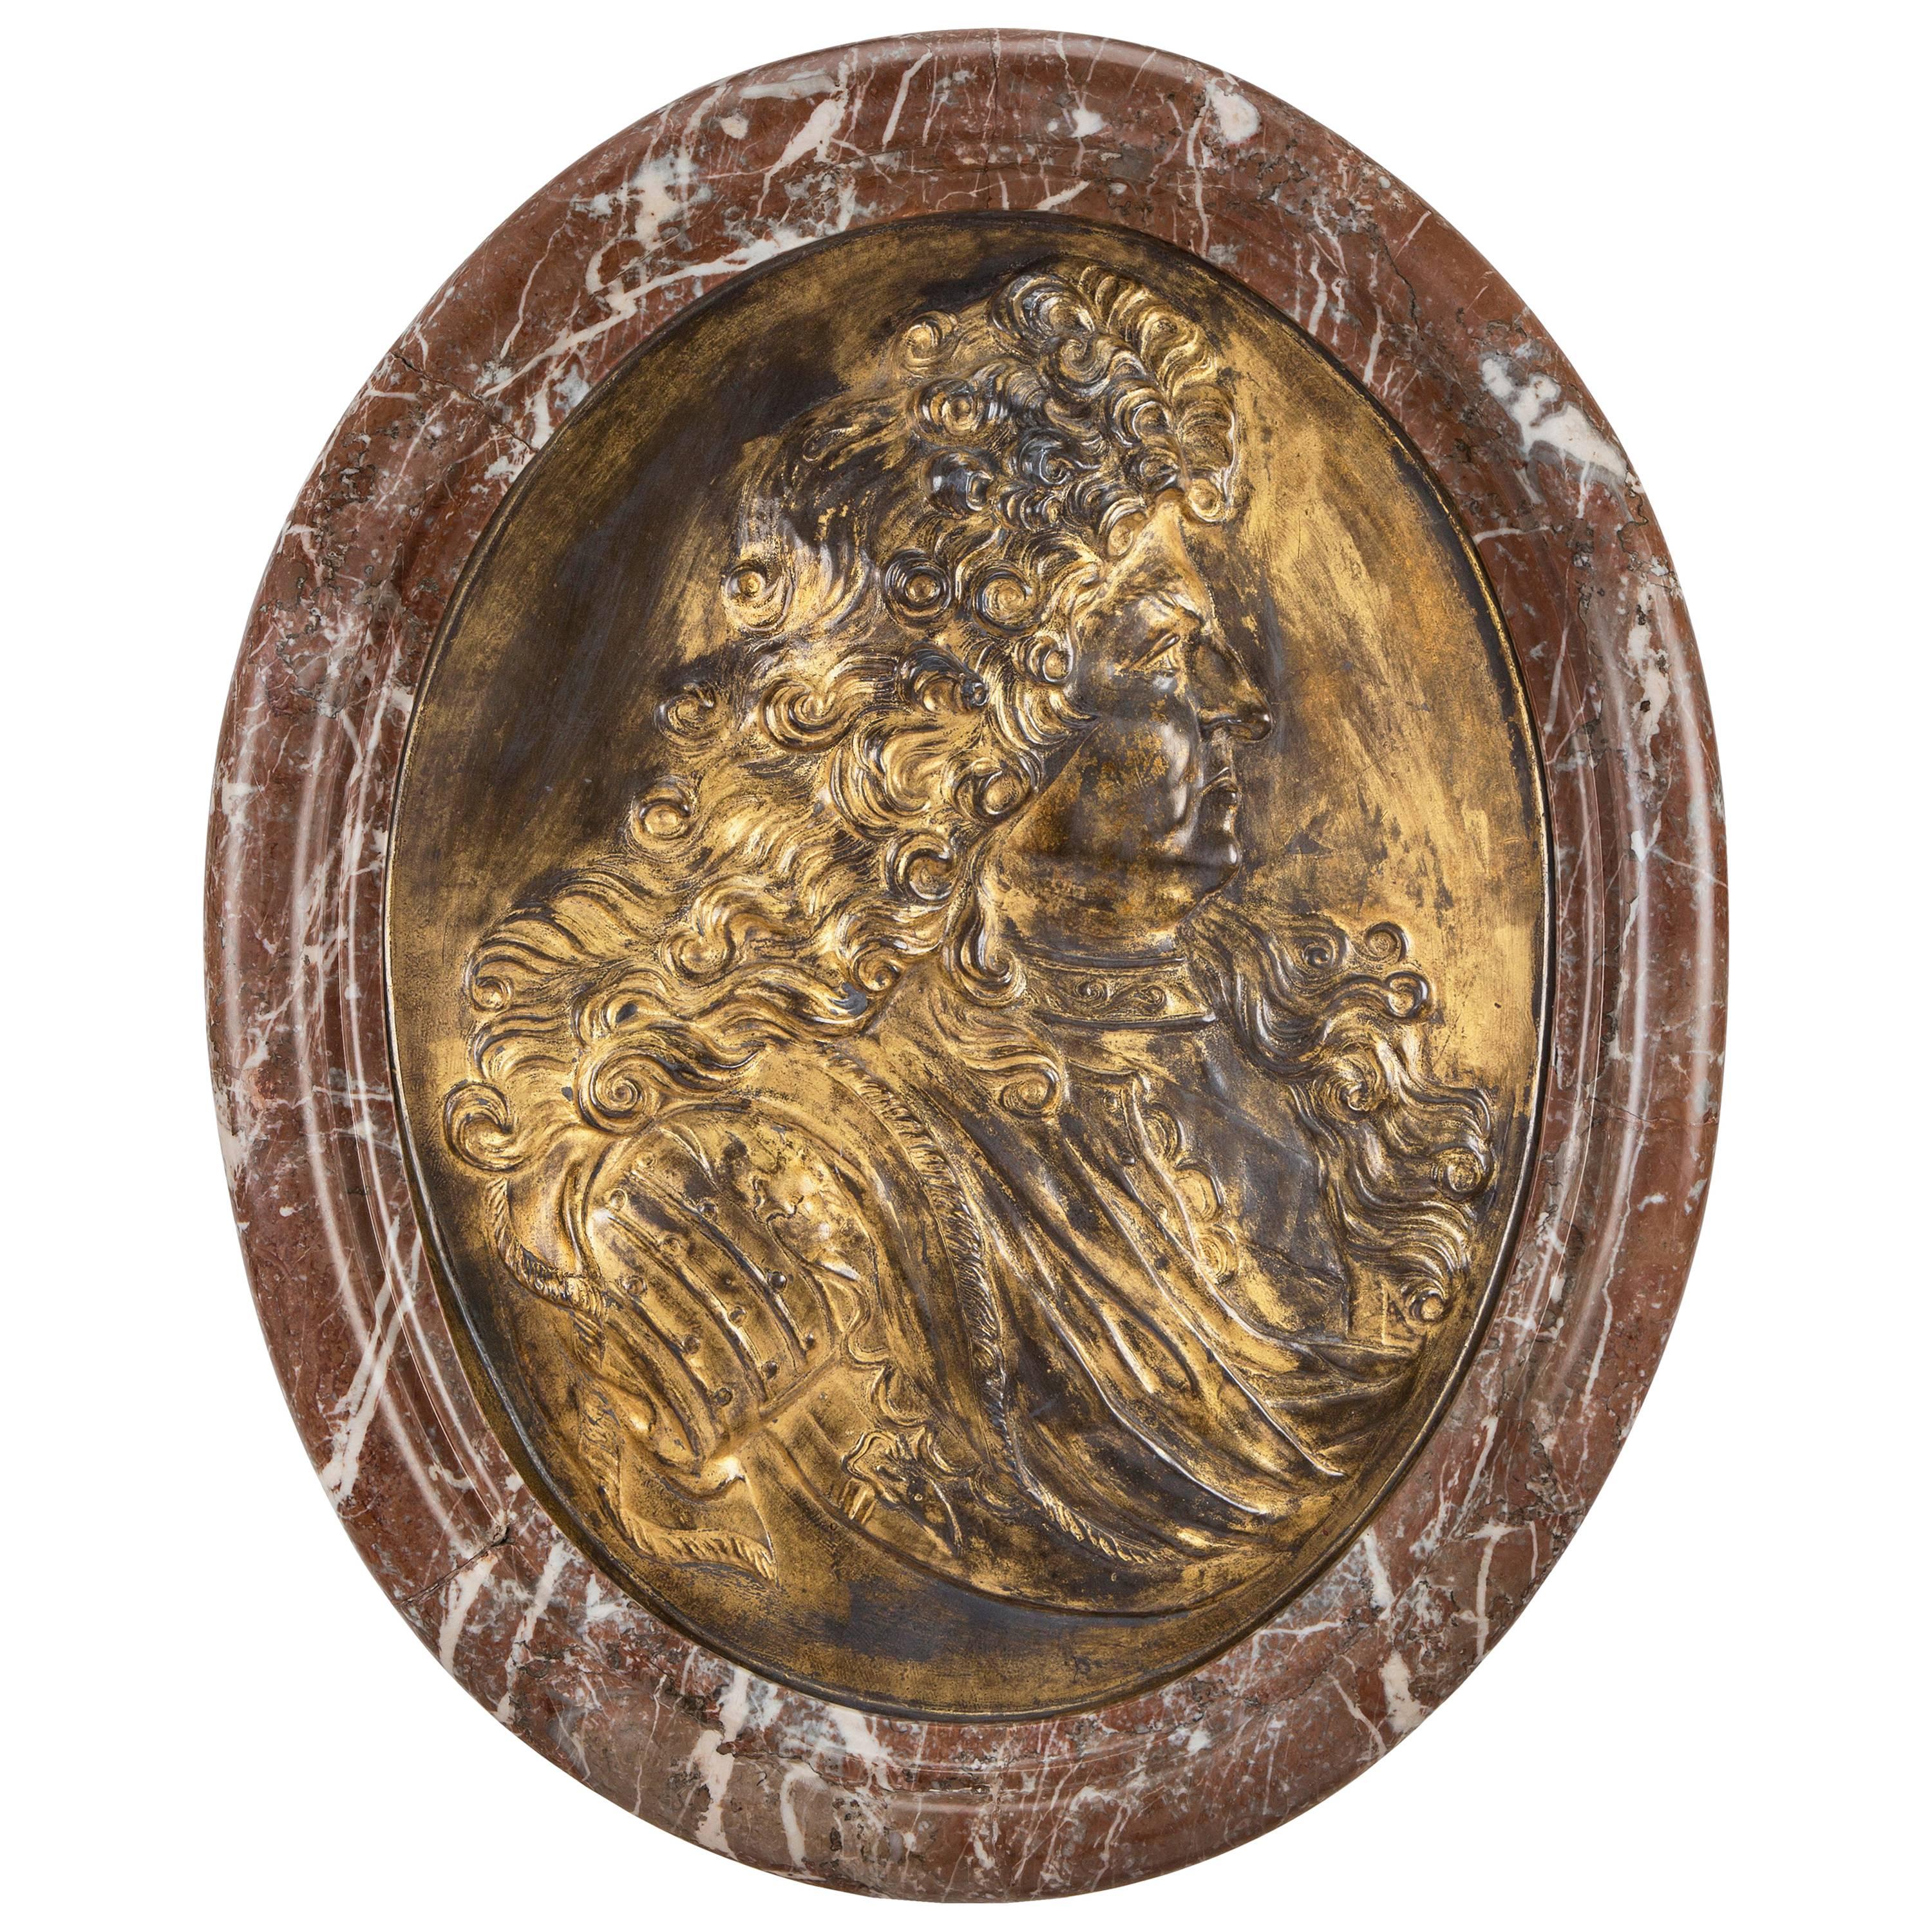 French Early 18th Century Louis XIV Wall Plaque from Alfred Taubman Collection